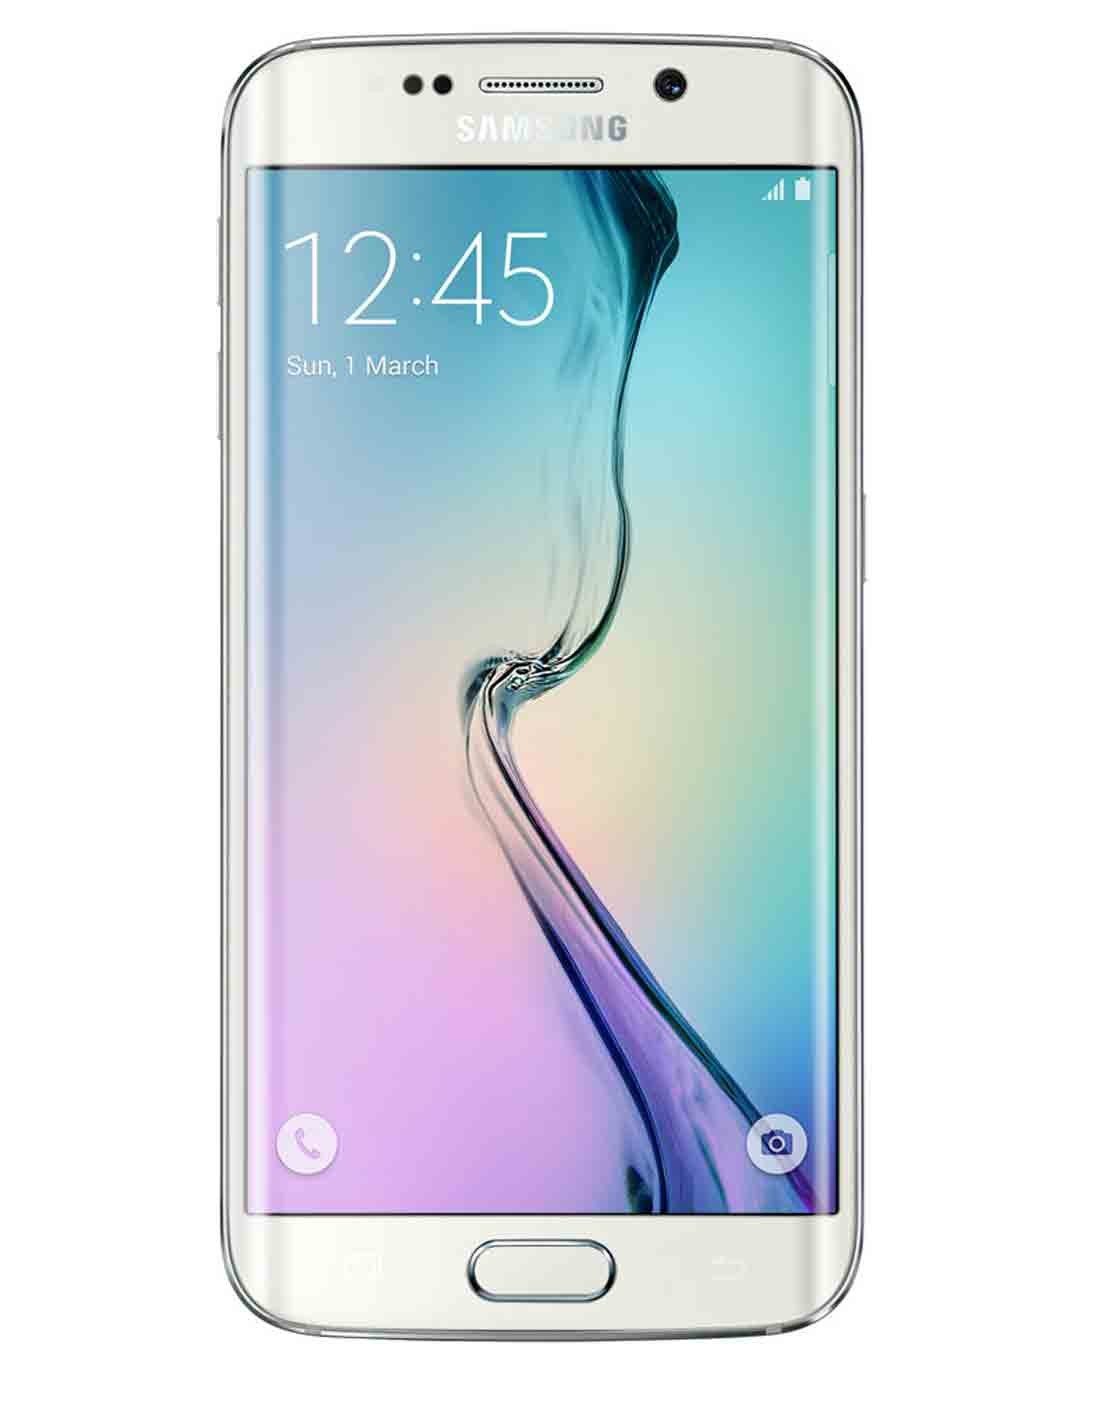 Samsung Galaxy S6 Edge SM-G925F White Pearl at a cheap price and free delivery in Dubai